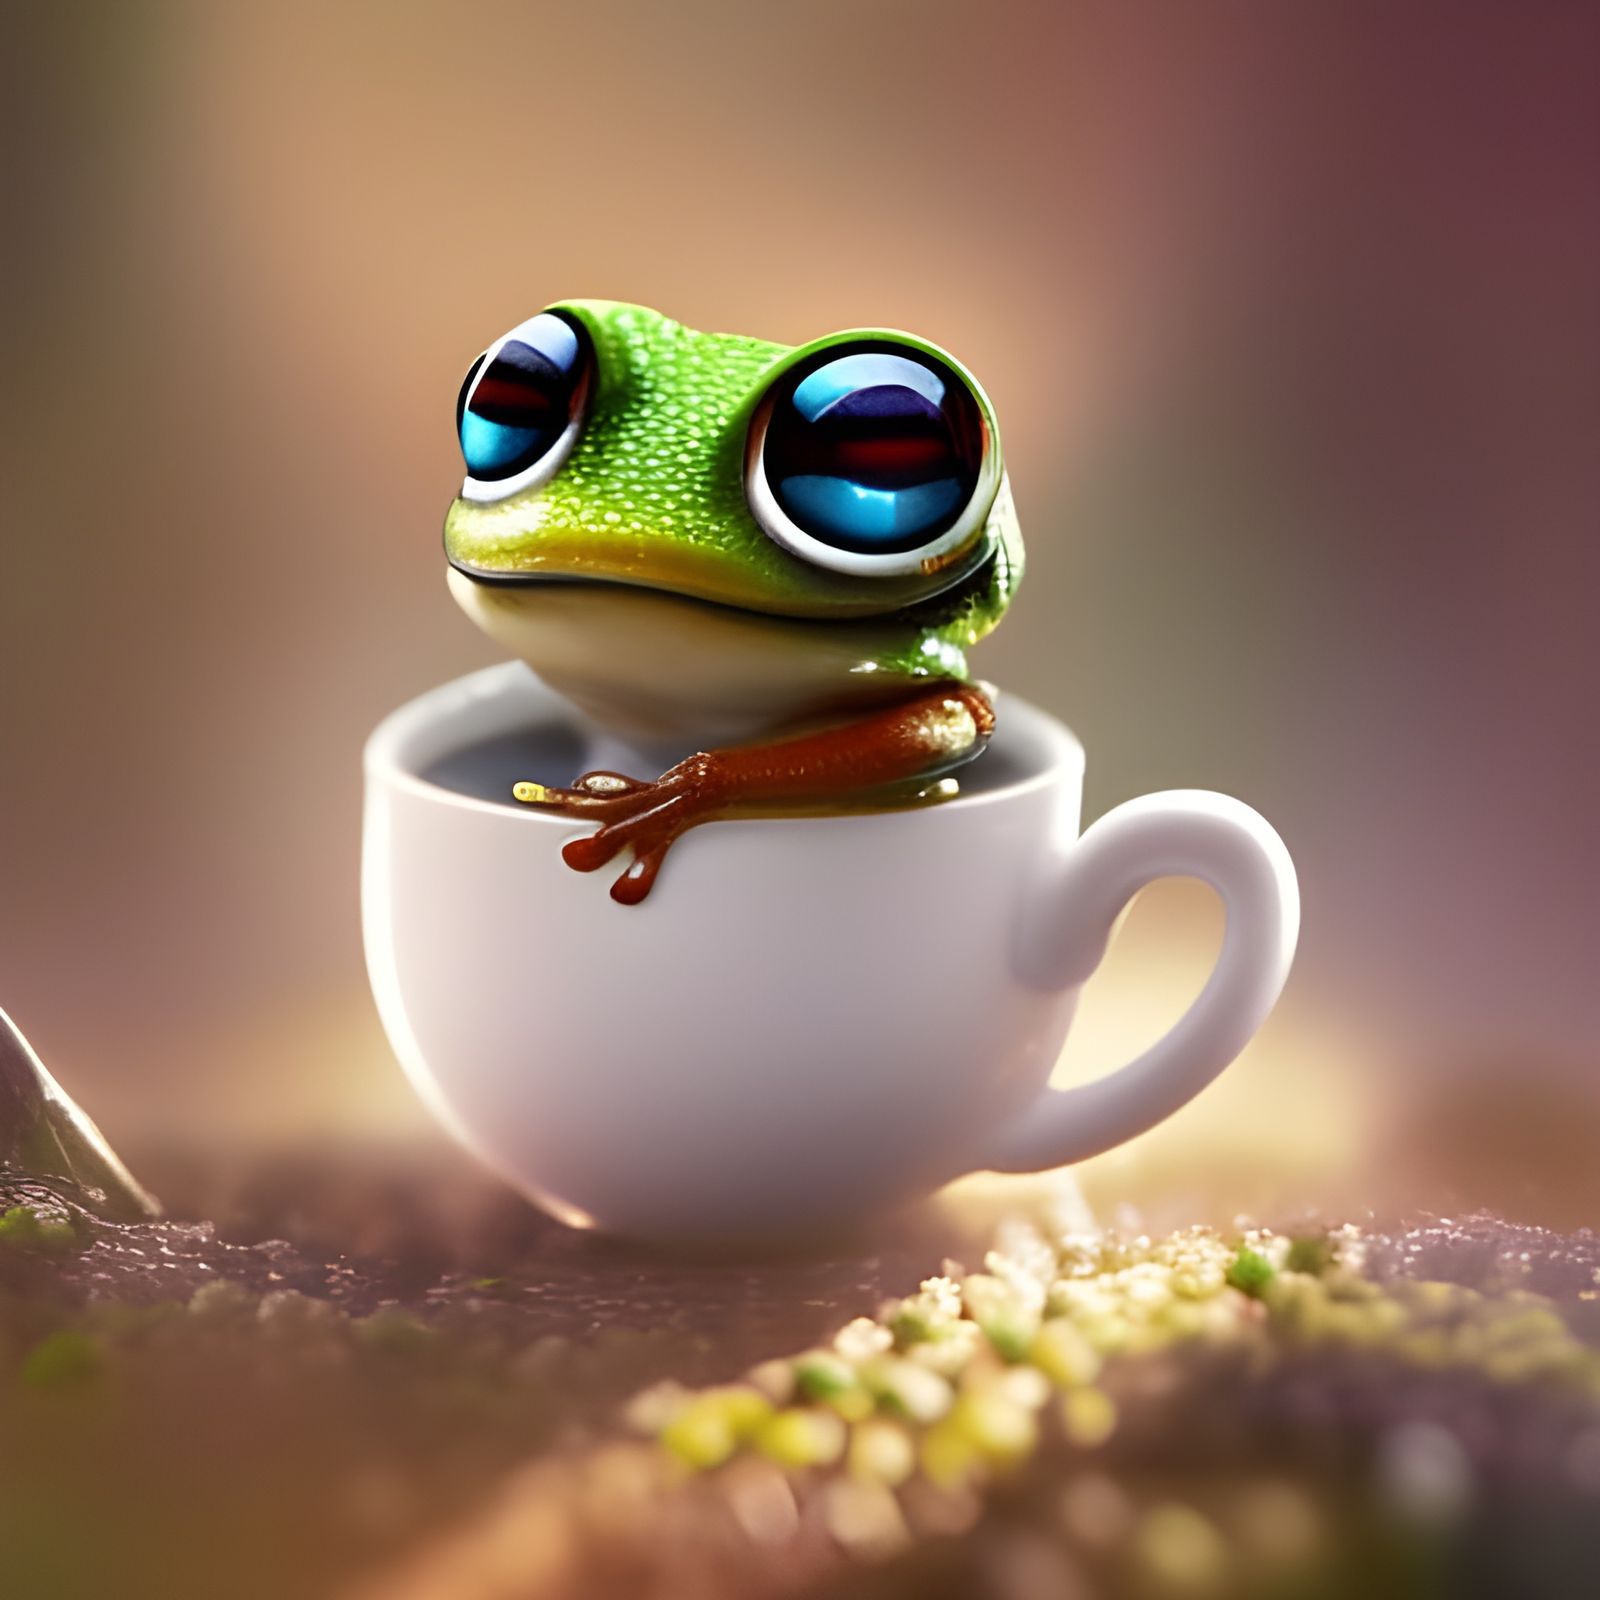 Insanely cute baby frog in teacup - AI Generated Artwork - NightCafe Creator